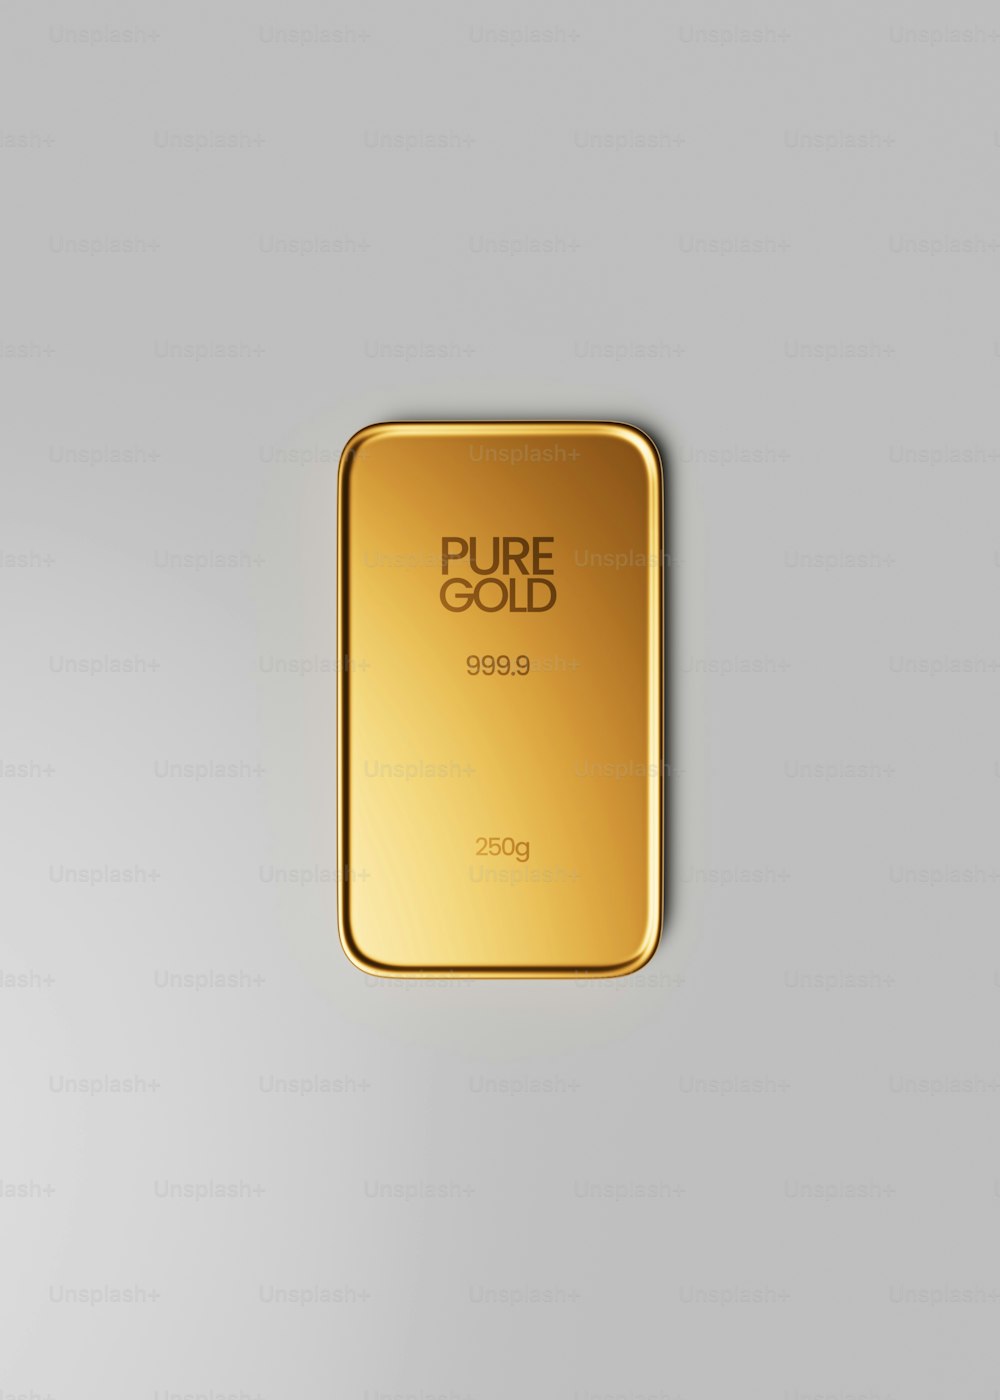 a gold bar on a white surface